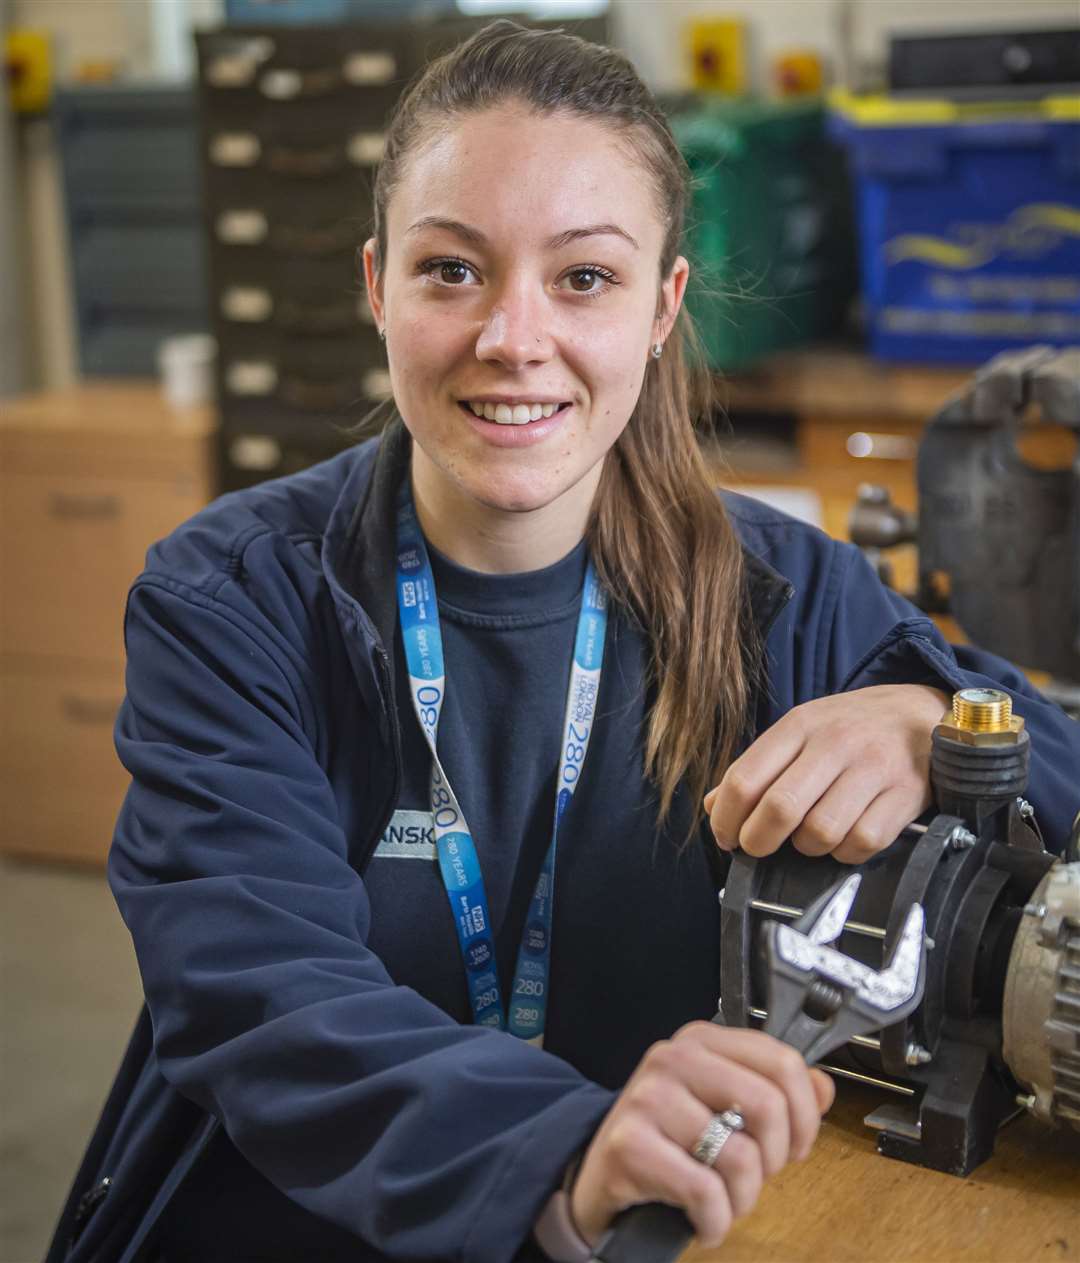 Lauren Steel has made it to the final of the Screwfix Apprentice competition